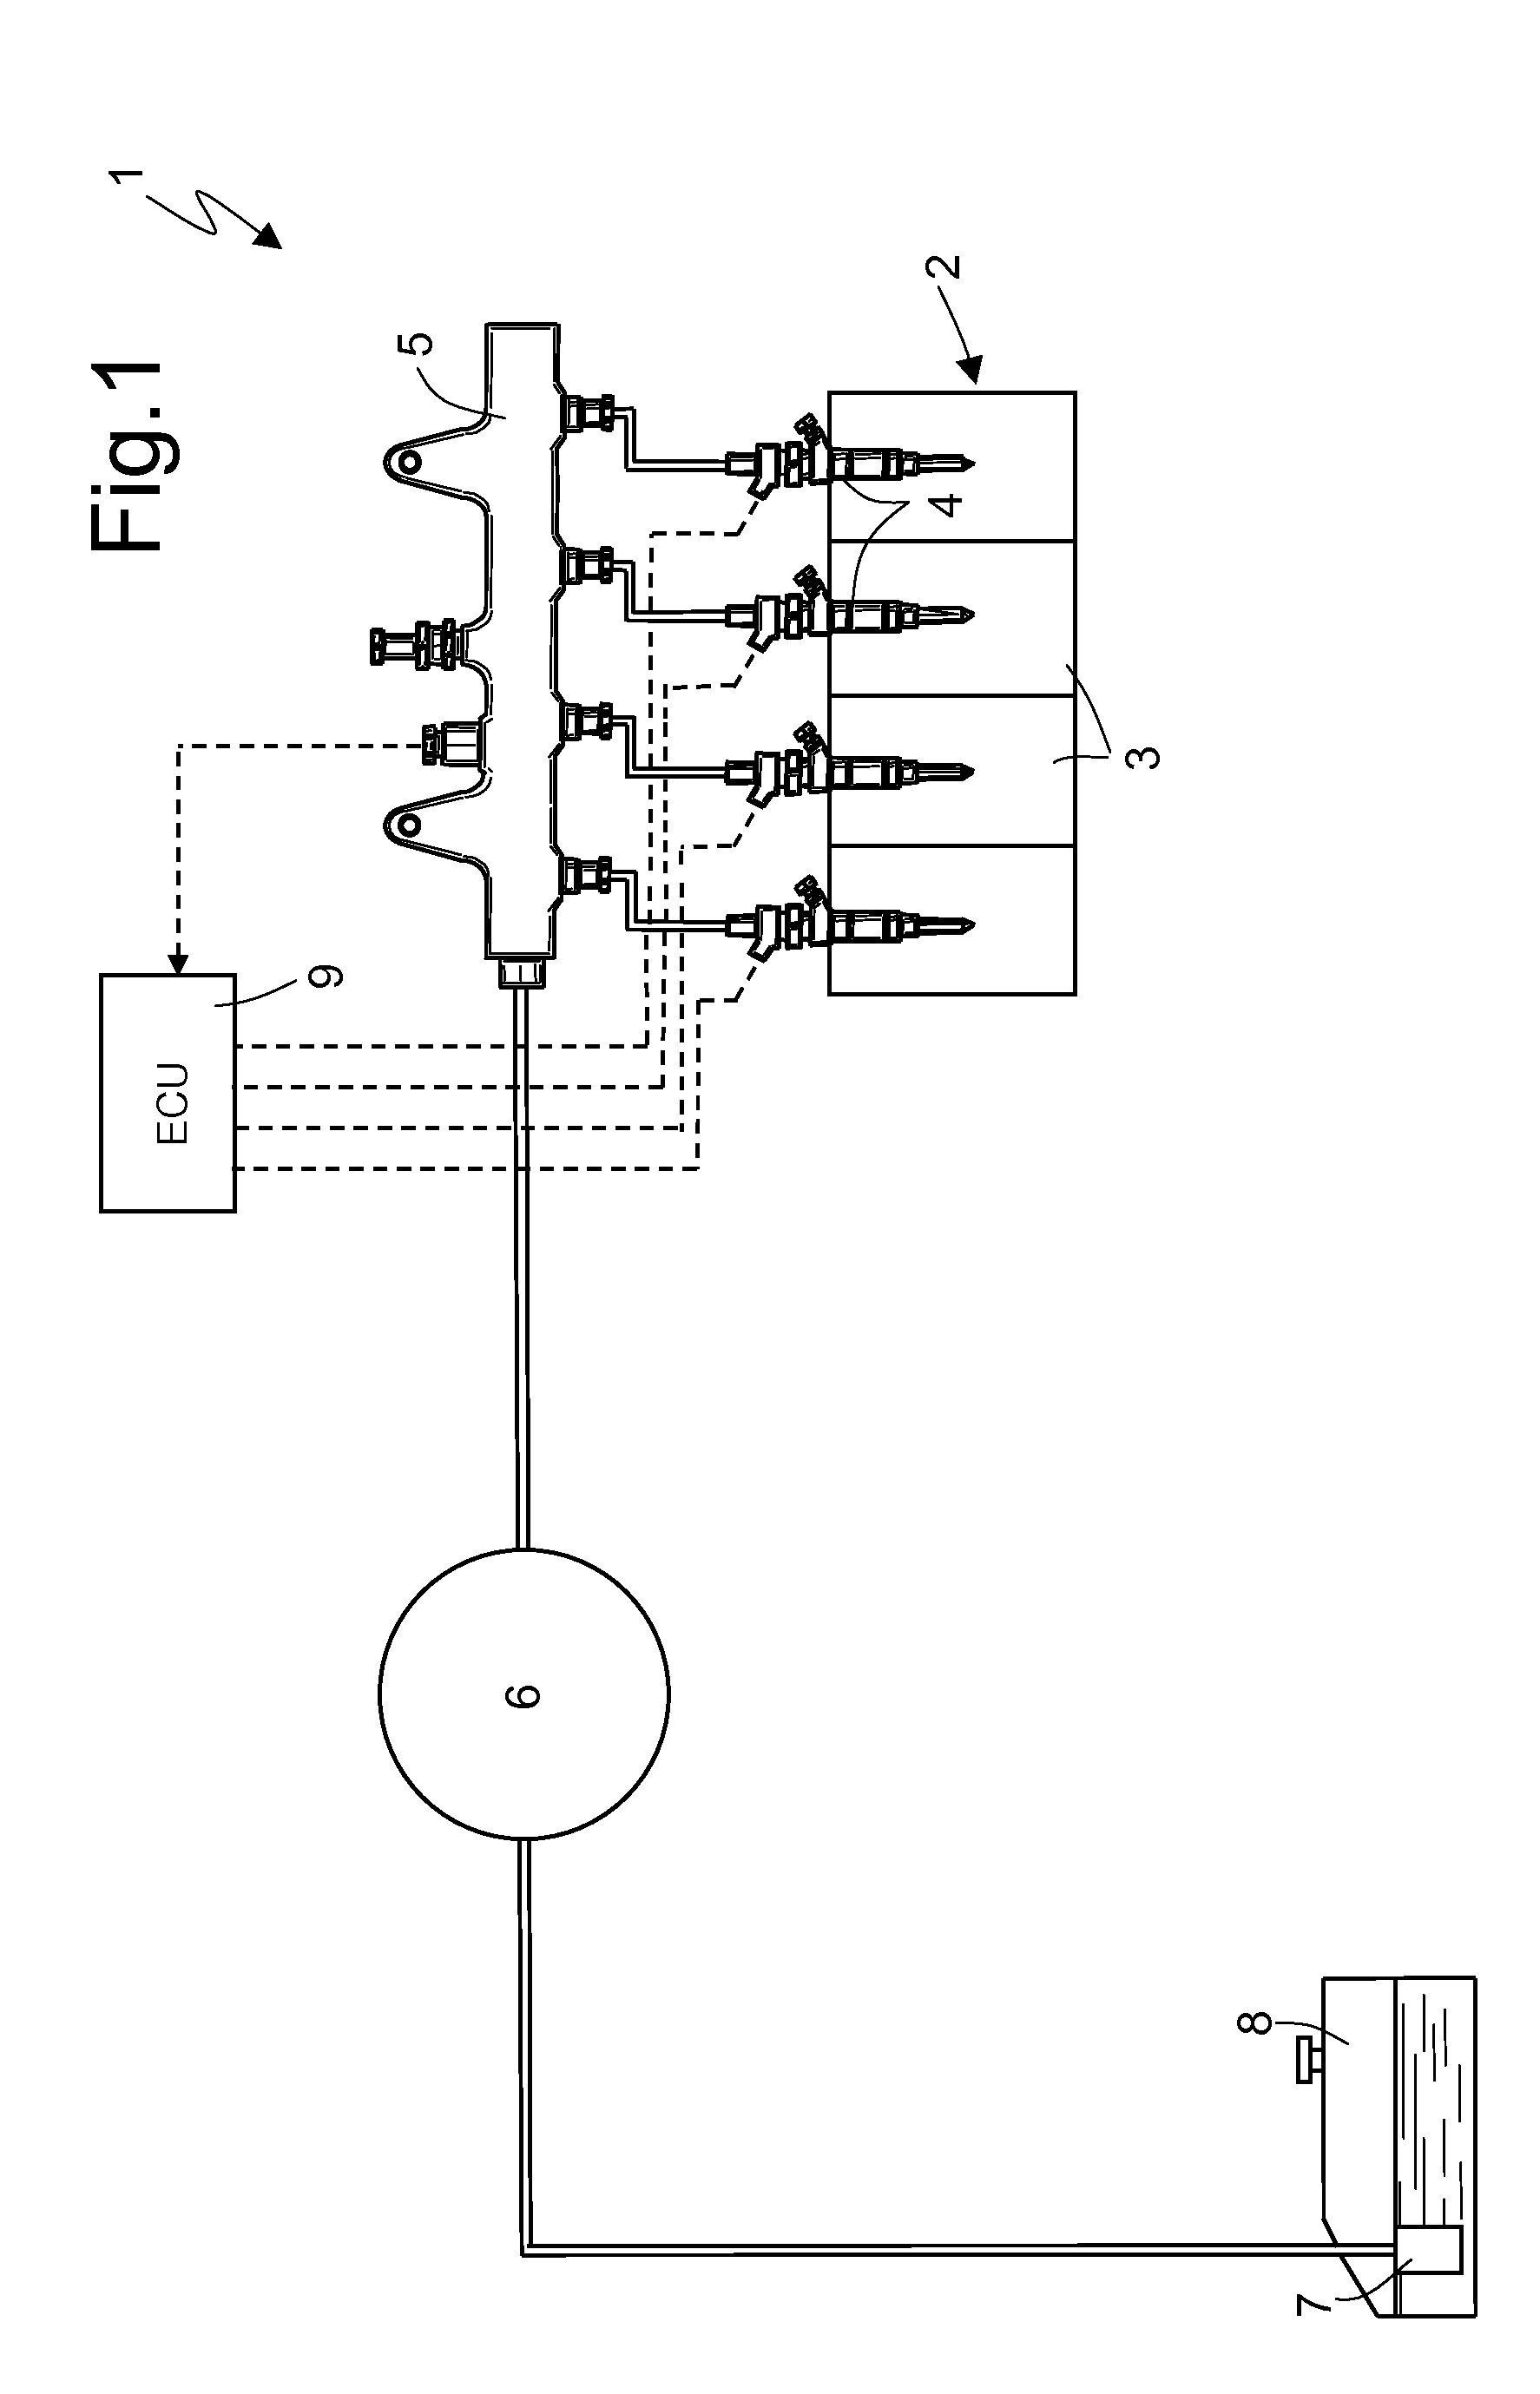 Method for determining the closing time of an electromagnetic fuel injector